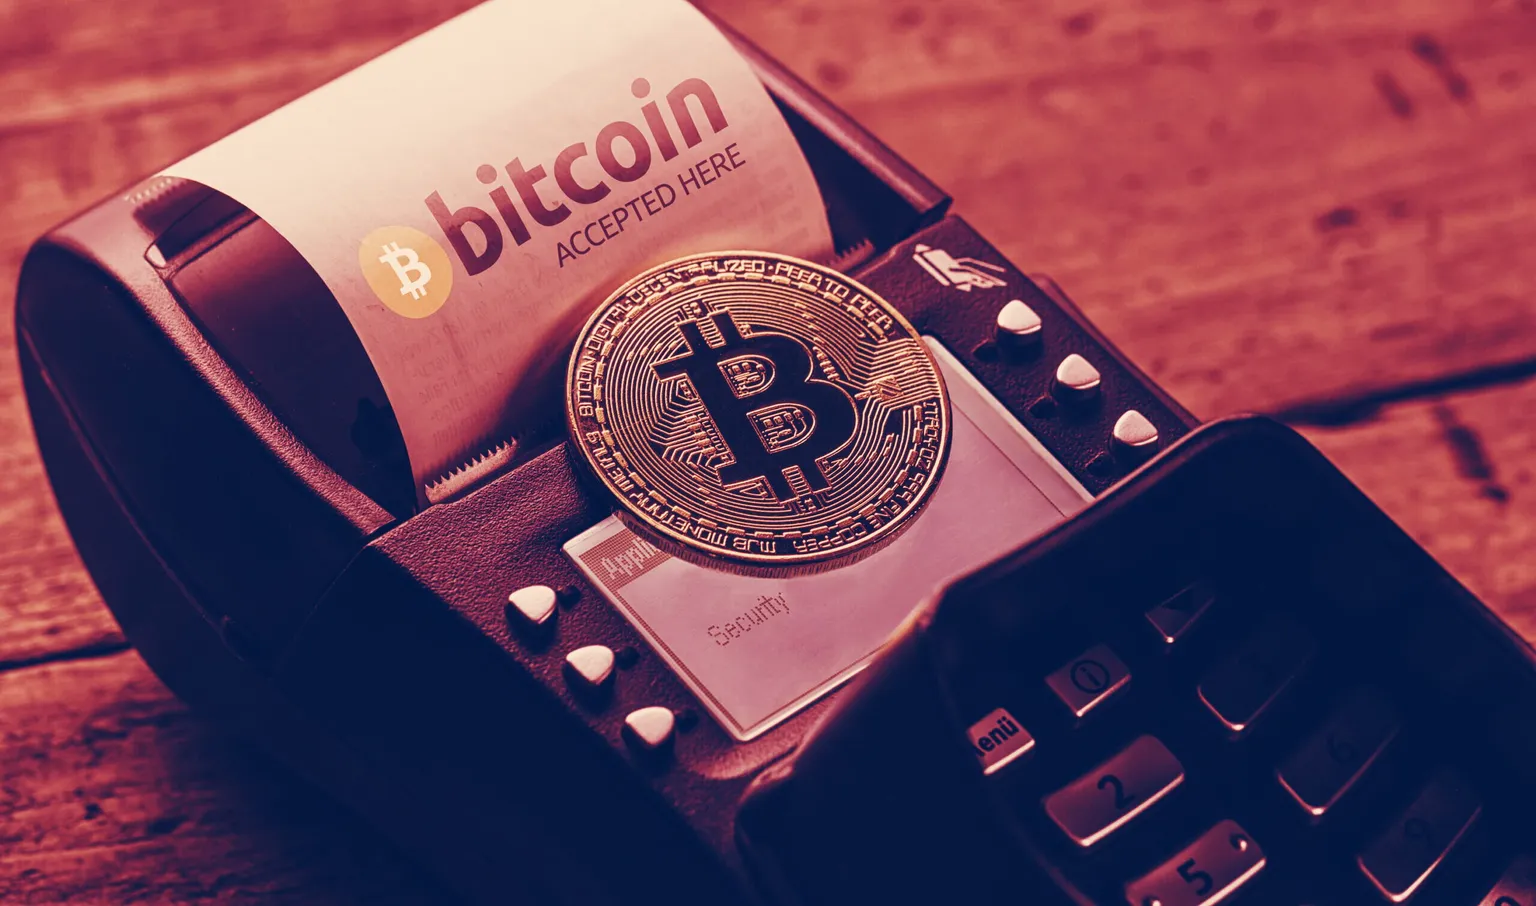 Bitcoin can be used like cash in exchange for goods and services. (Image: Shutterstock)